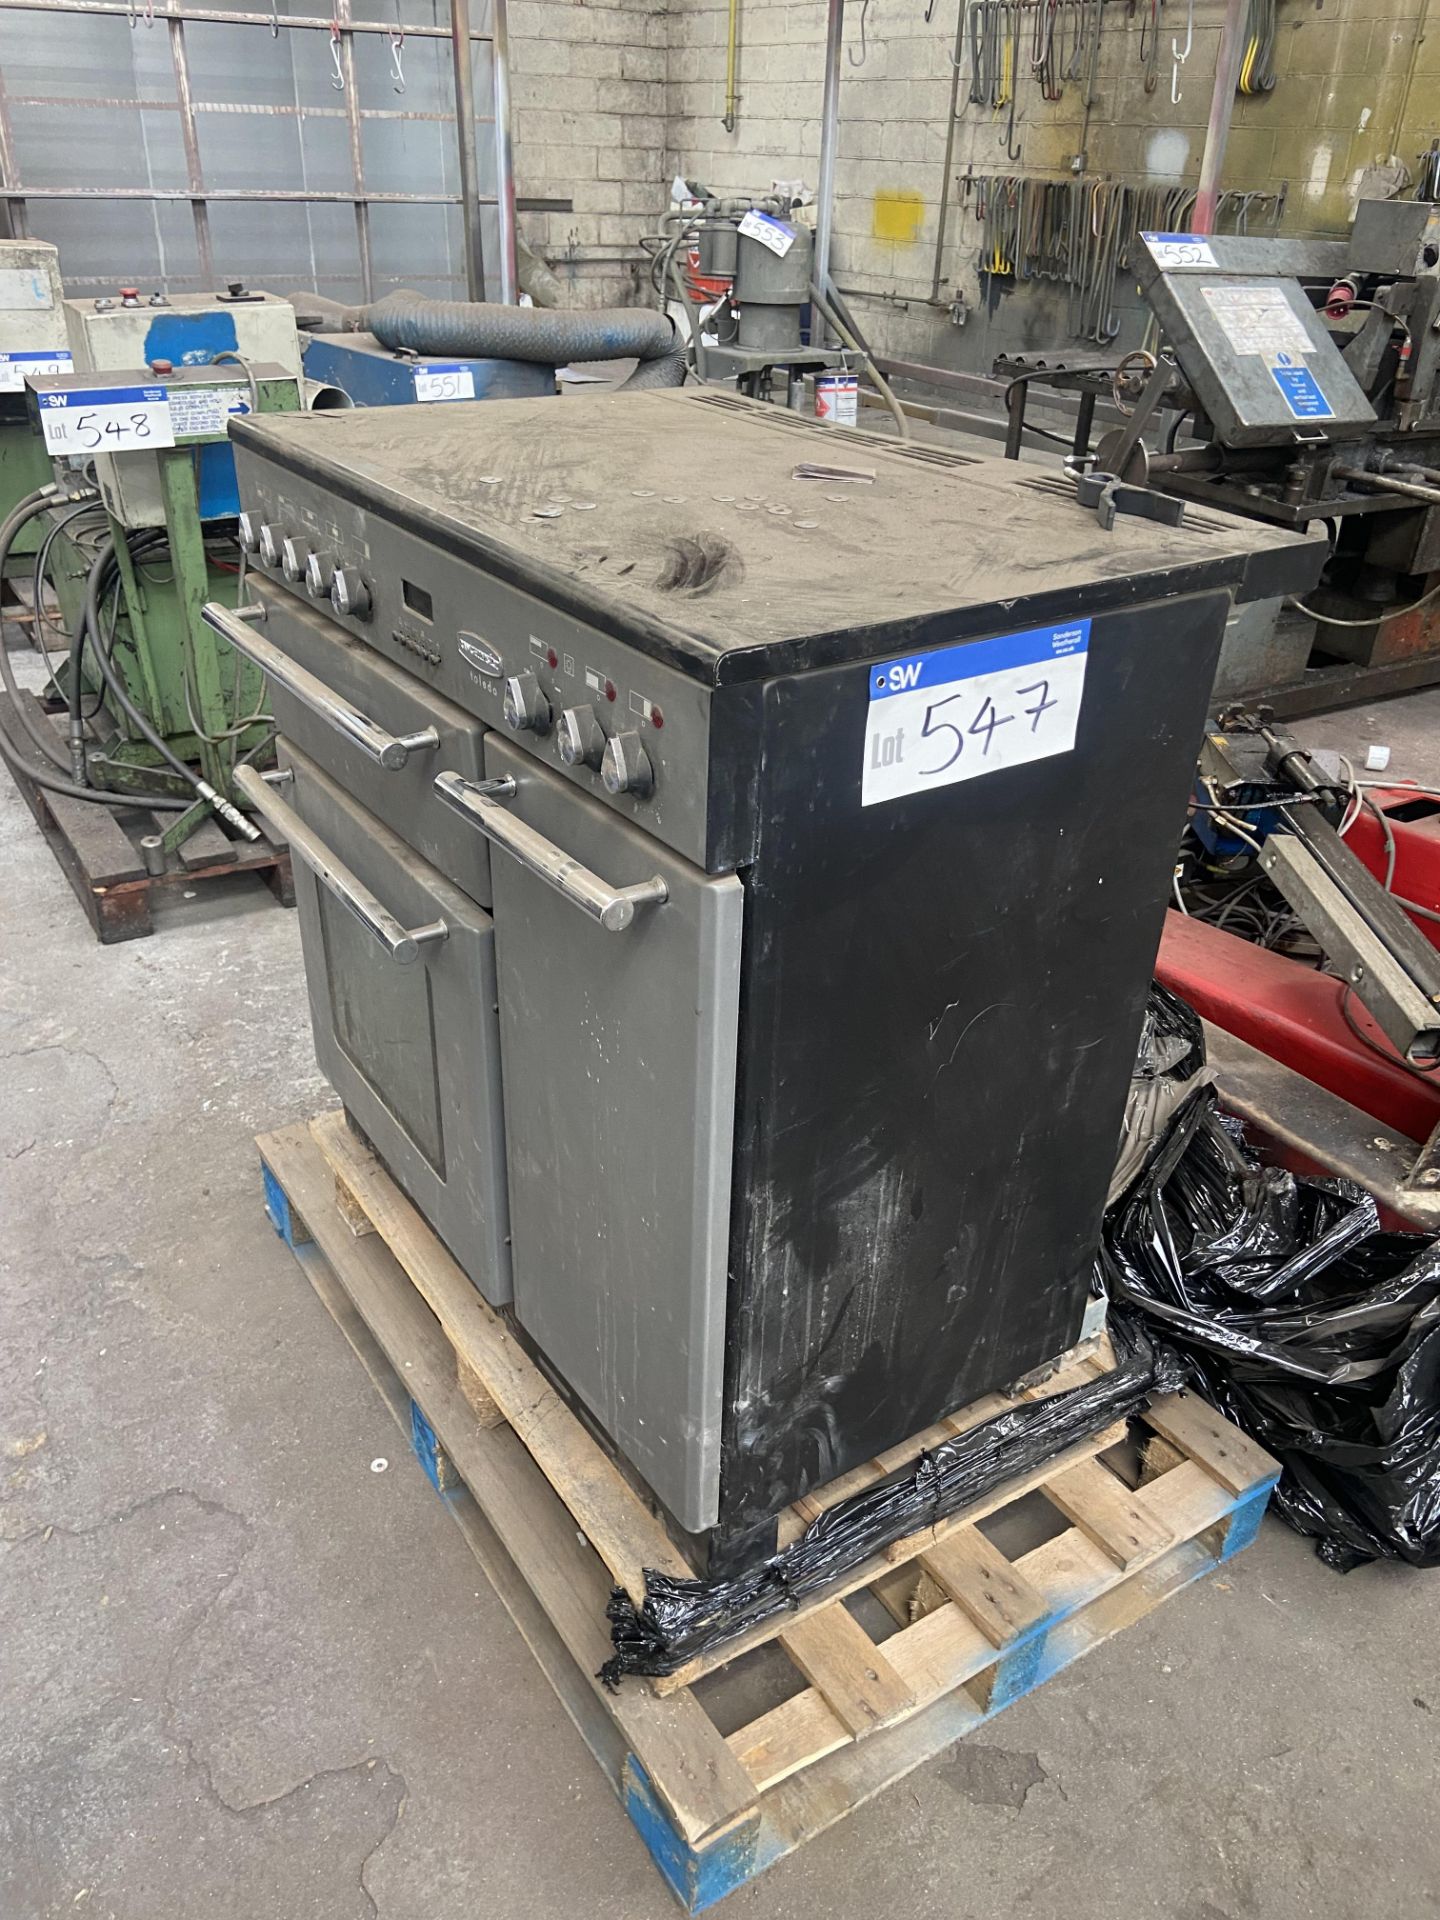 Rangemaster Toledo Electric Oven Range, serial no. 6435 007017 Please read the following important